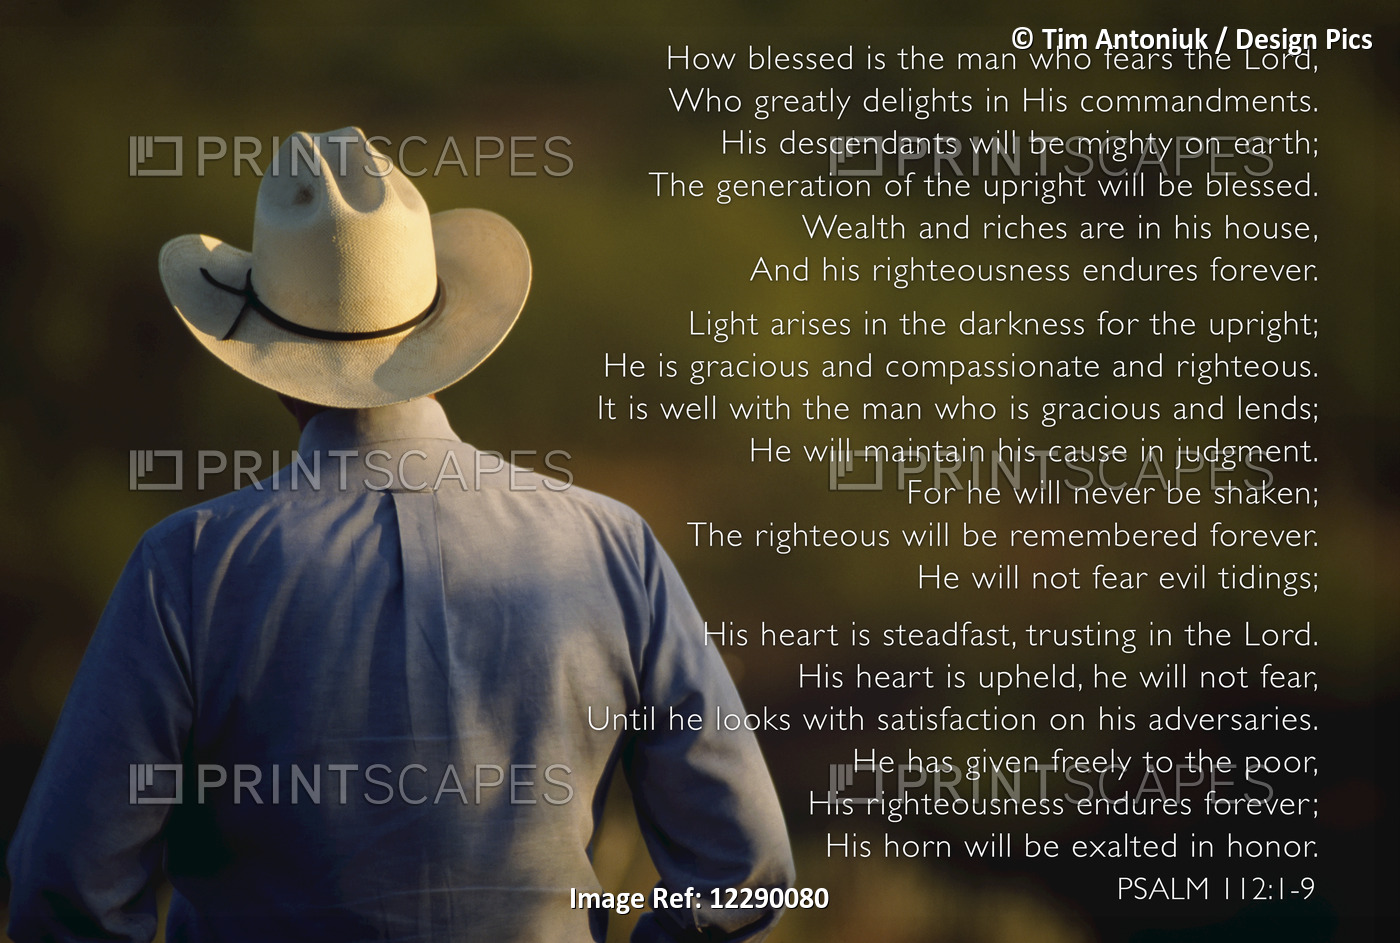 Image Of A Man In A Cowboy Hat With A Scripture Passage From Psalm 112:1-9